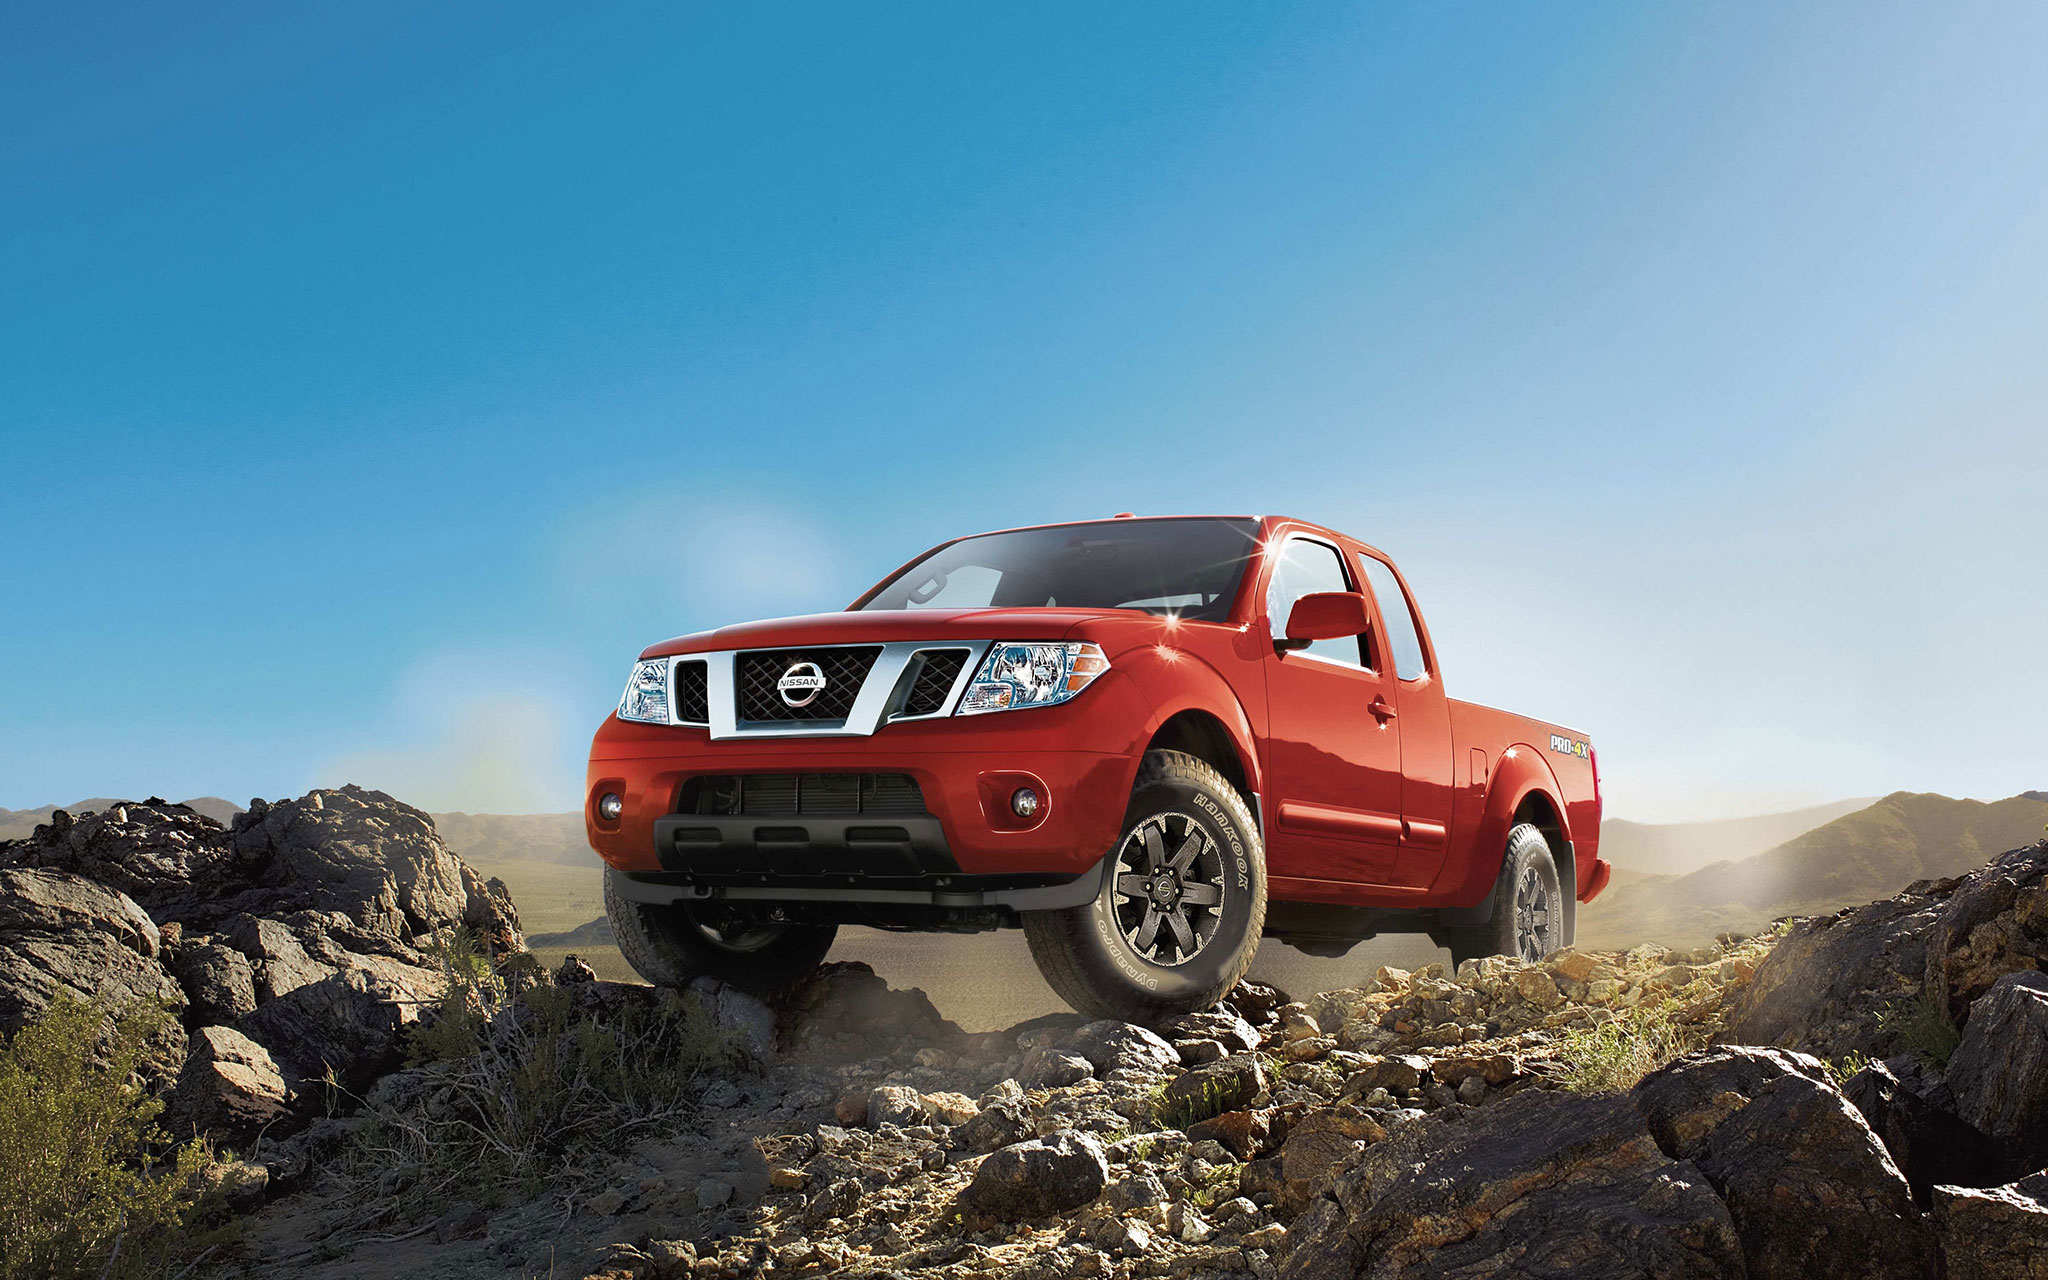 2005 Nissan Frontier Factory Equipped with Rockford Fosgate Audio Hero Red.